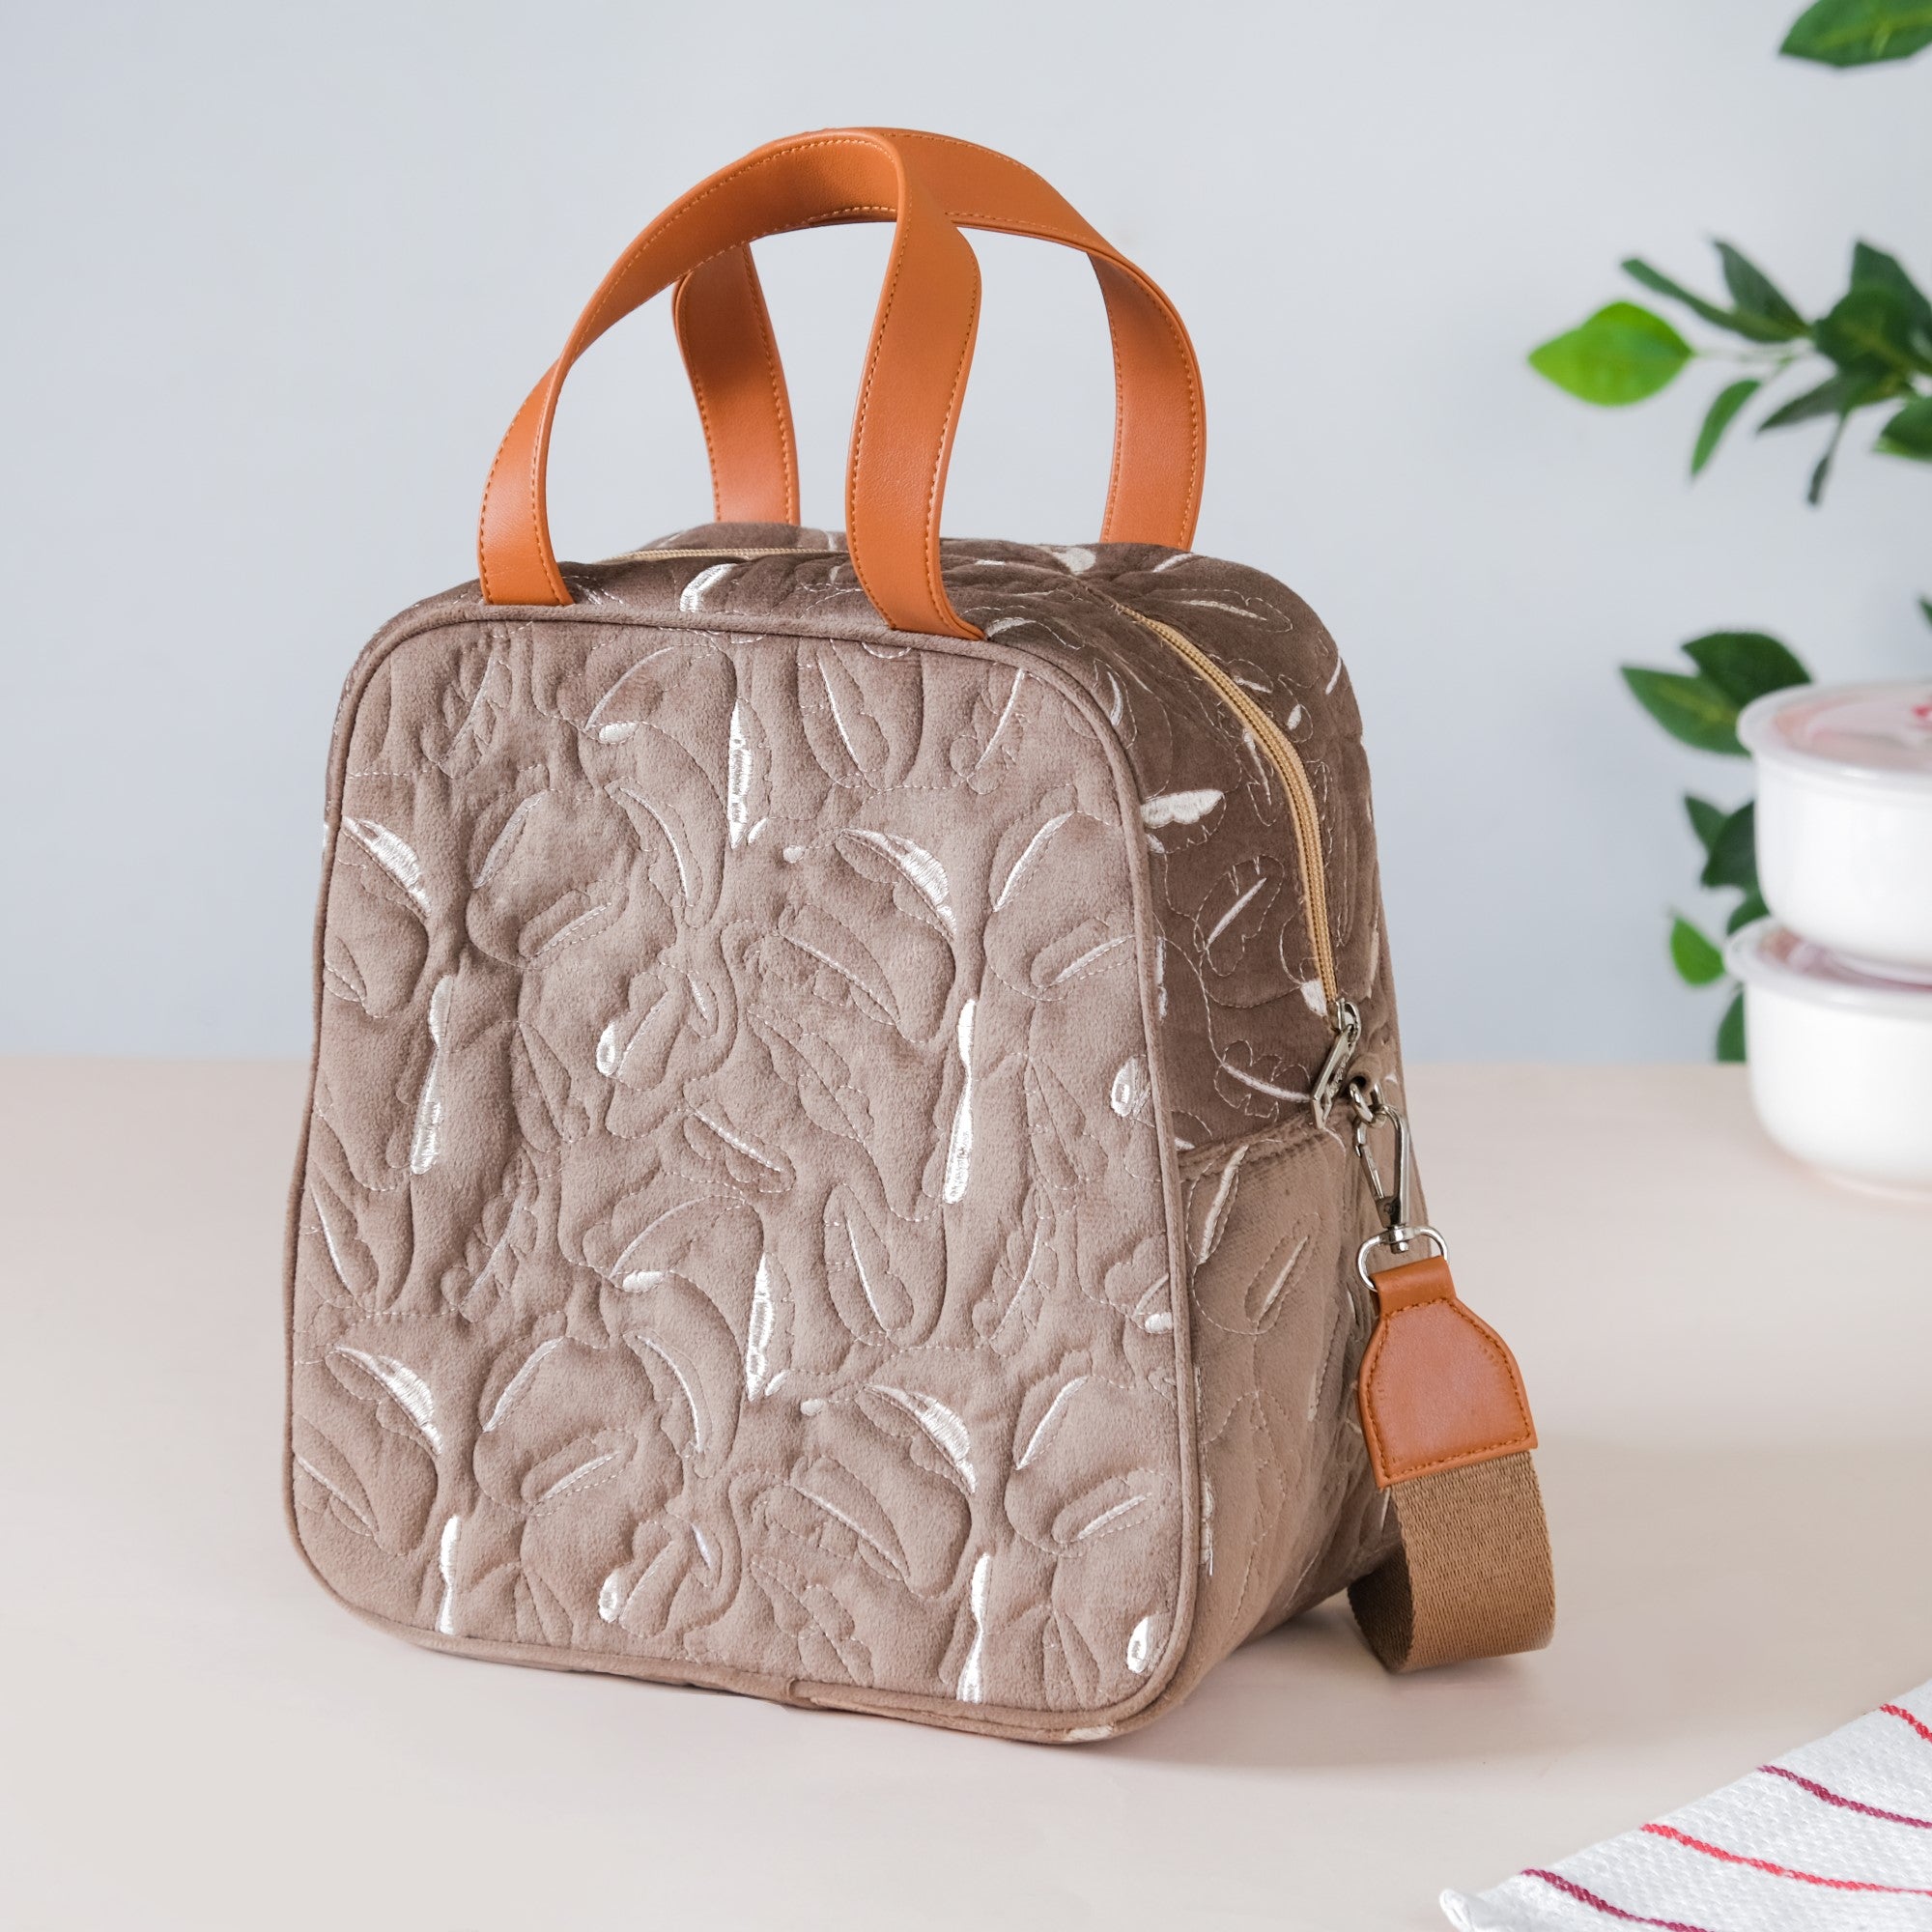 Louis Vuitton's new drop is the most luxurious lunch bag on the market  sort of